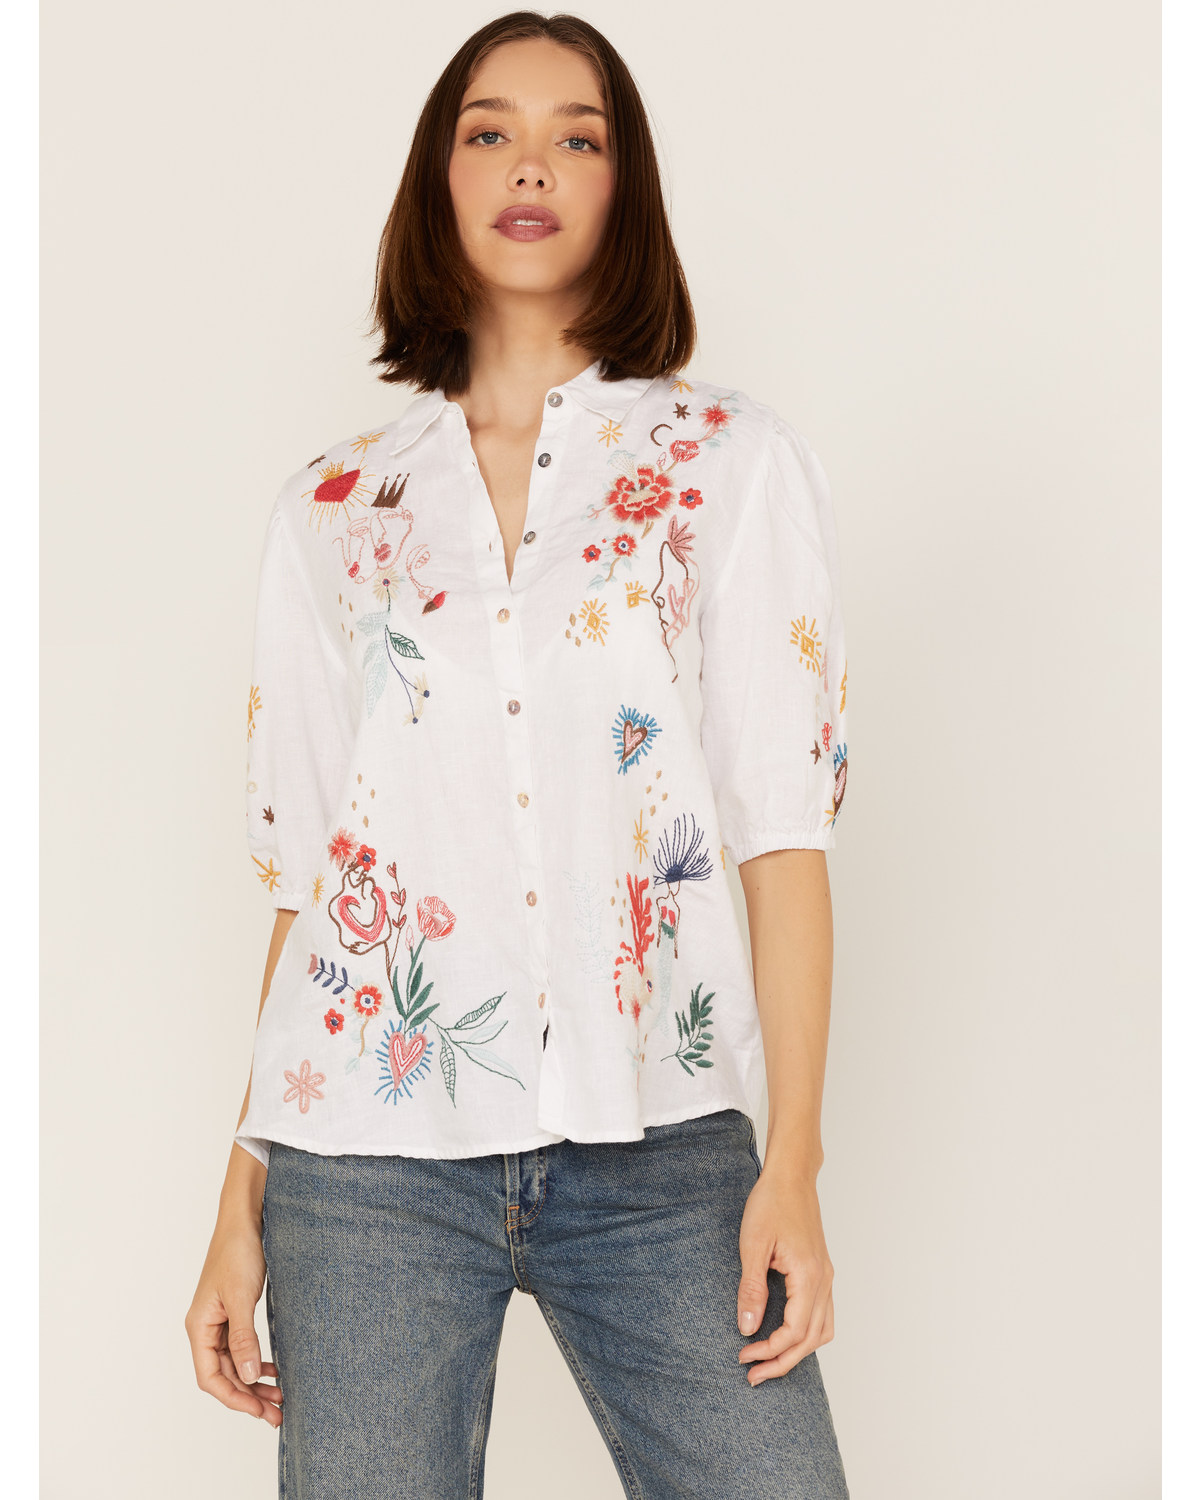 Johnny Was Women's Embroidered Lisbon Short Sleeve Button Down Blouse